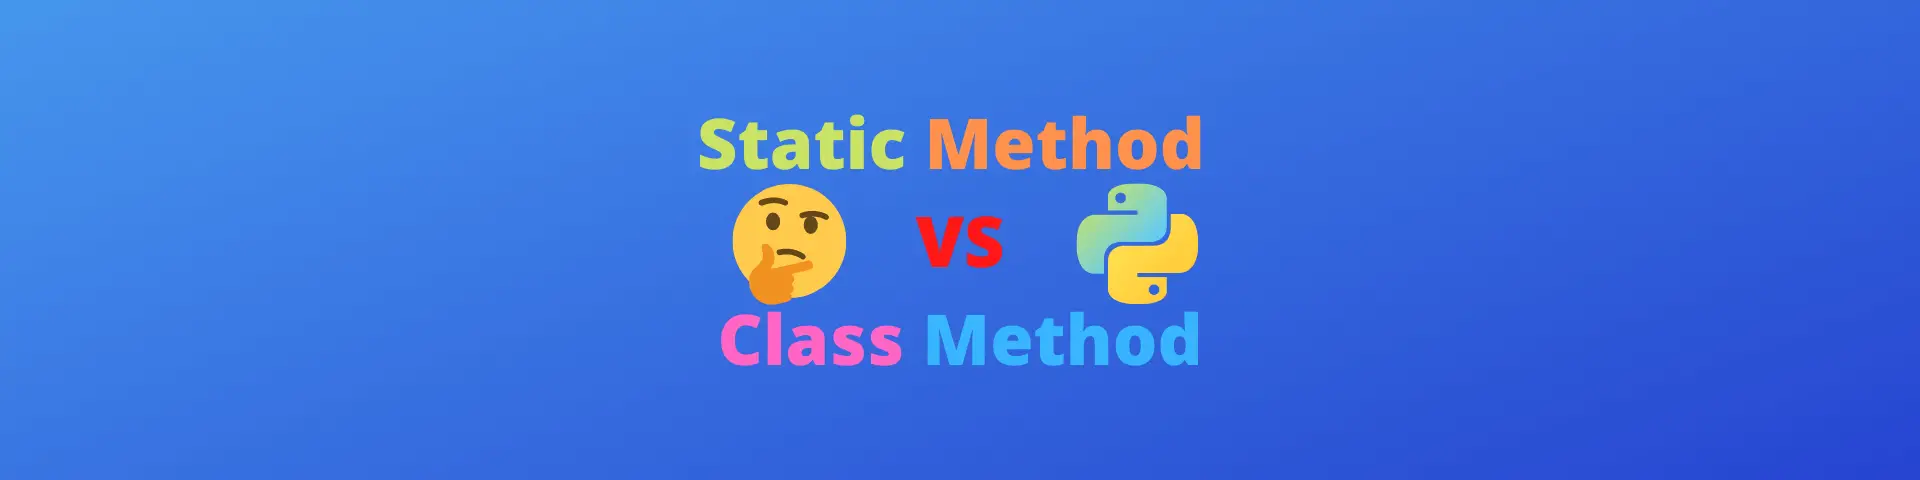 Difference between Static Method and Class Method in Python